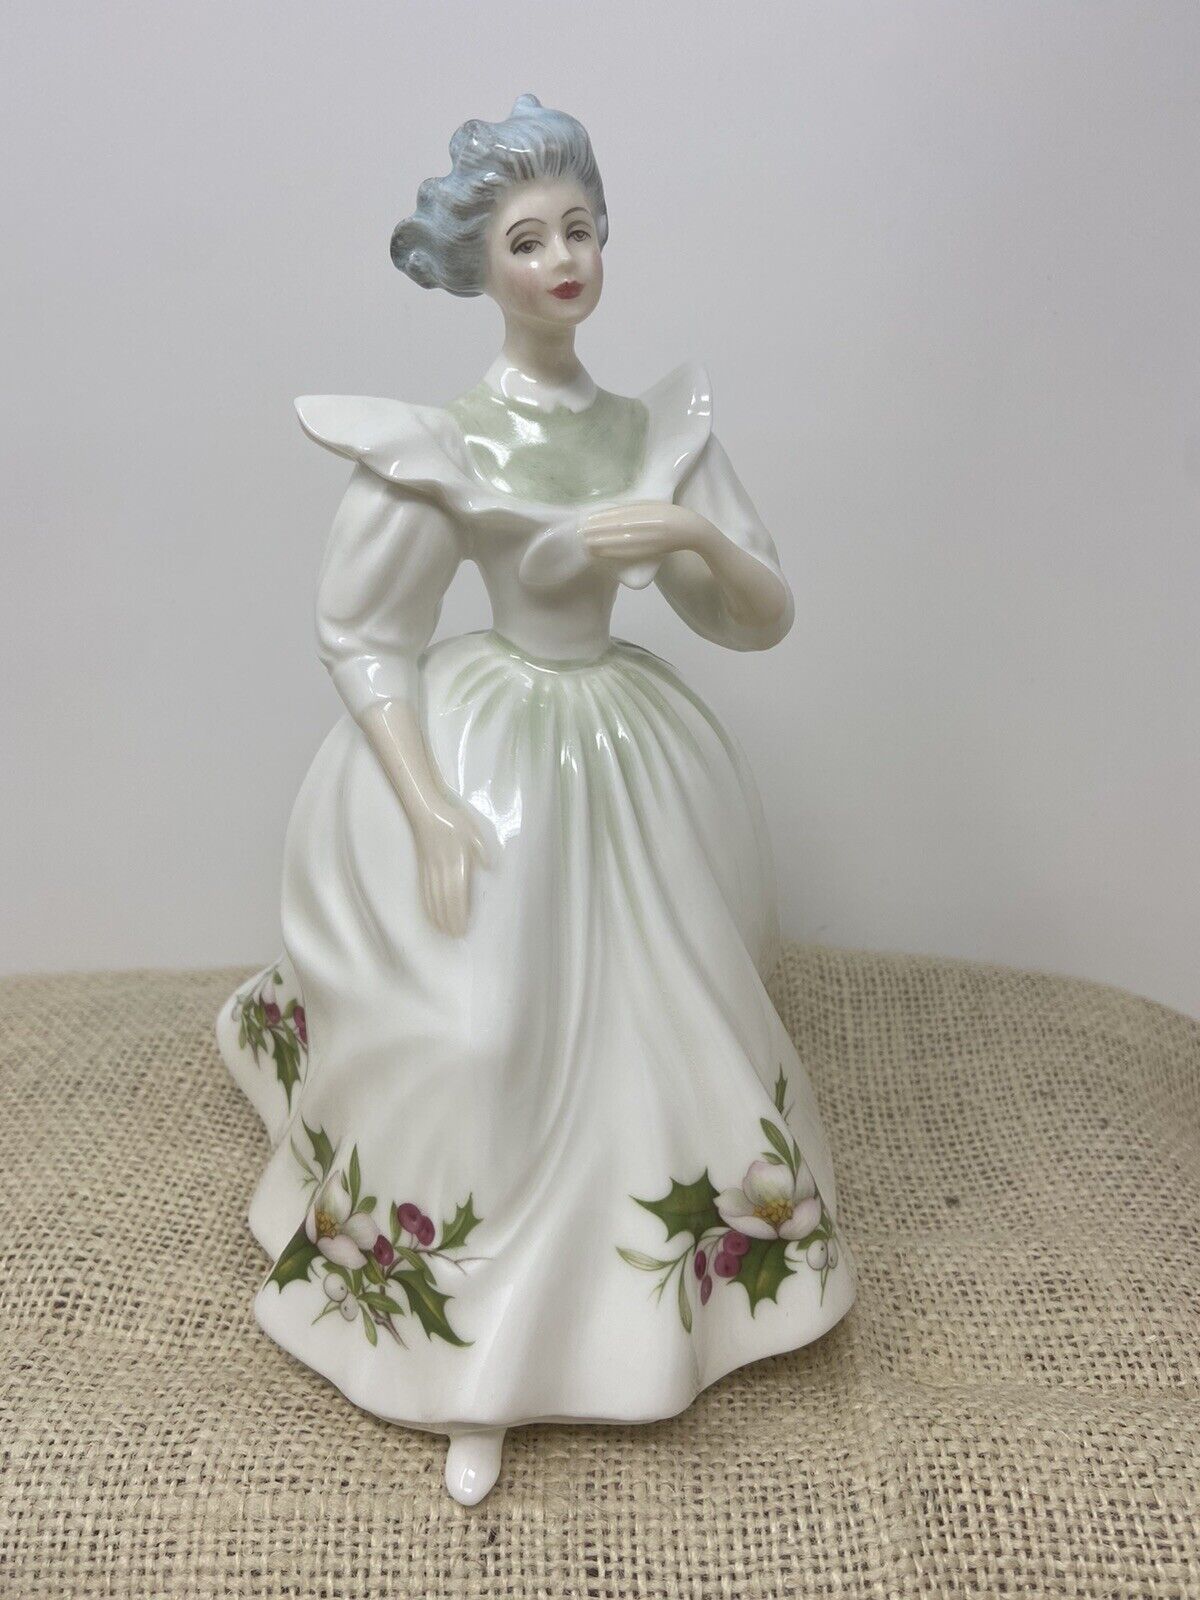 Royal Doulton December Bone China Figurine - Handmade and Hand painted in England - HN2696 - Royal Gift